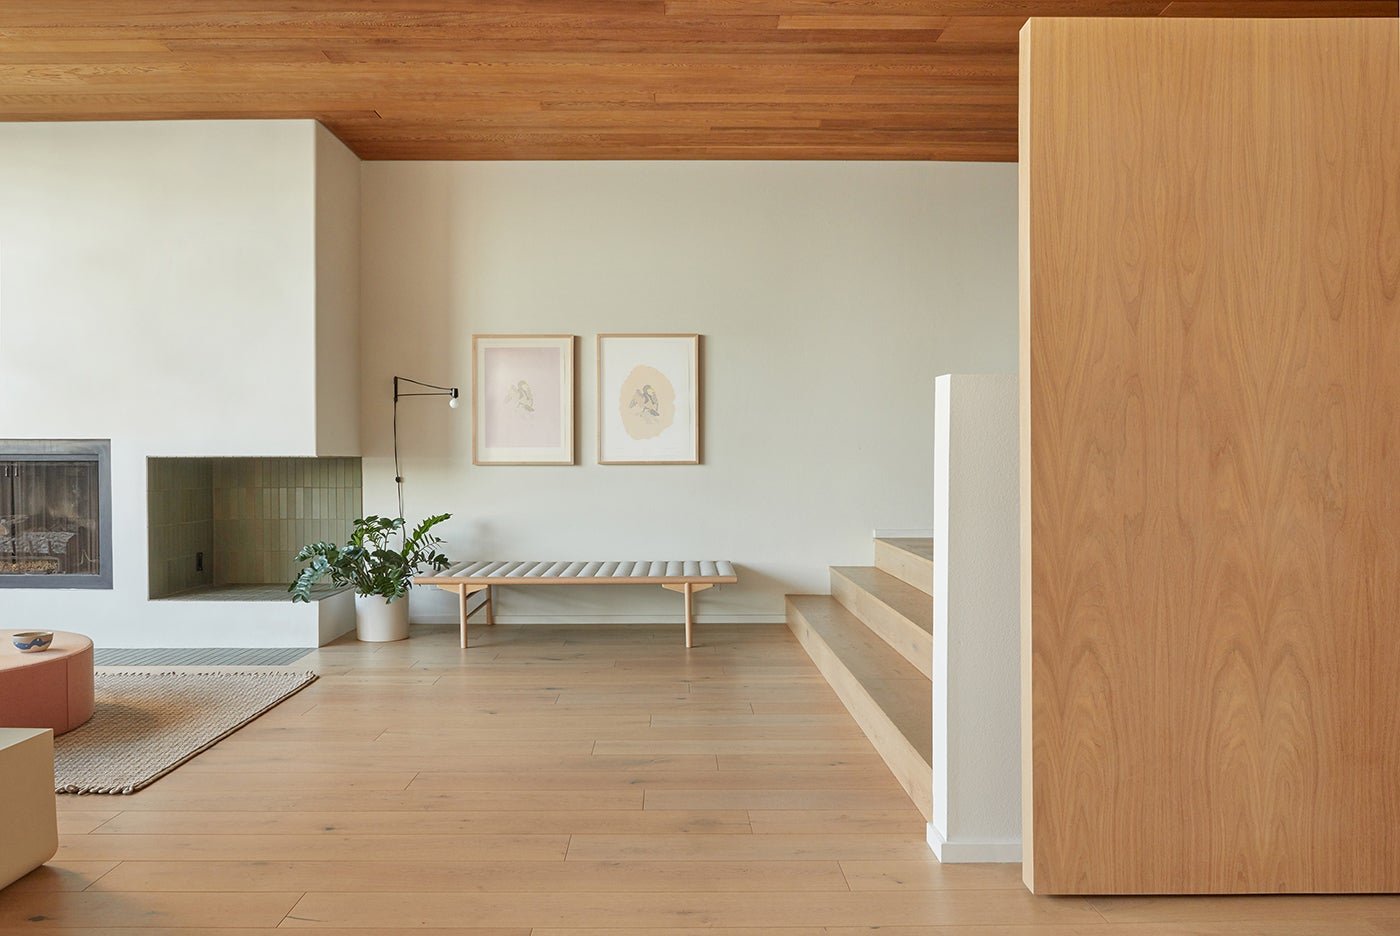 This Clever Murphy Bed Creates a Guest-Room Nook Where There Isn’t One